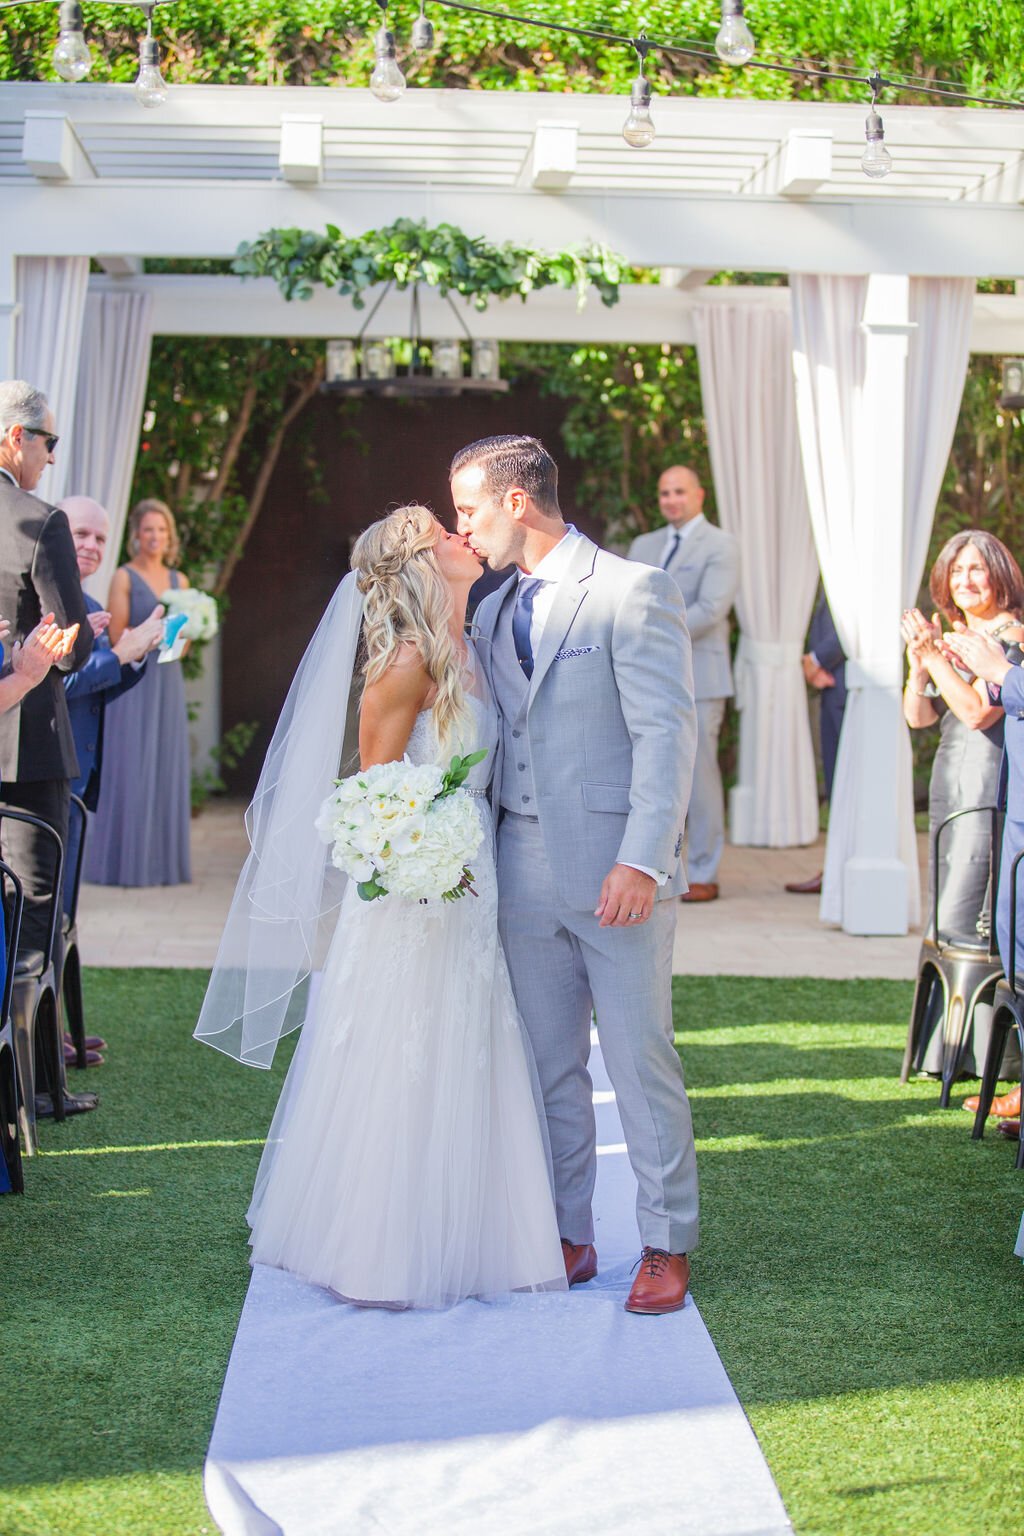 www.santabarbarawedding.com | Fess Parker Wine Country Inn | Epiphany Events | Linda Chaja | Wild Poppy Floral Design | LunaBella | Bride and Groom’s First Kiss